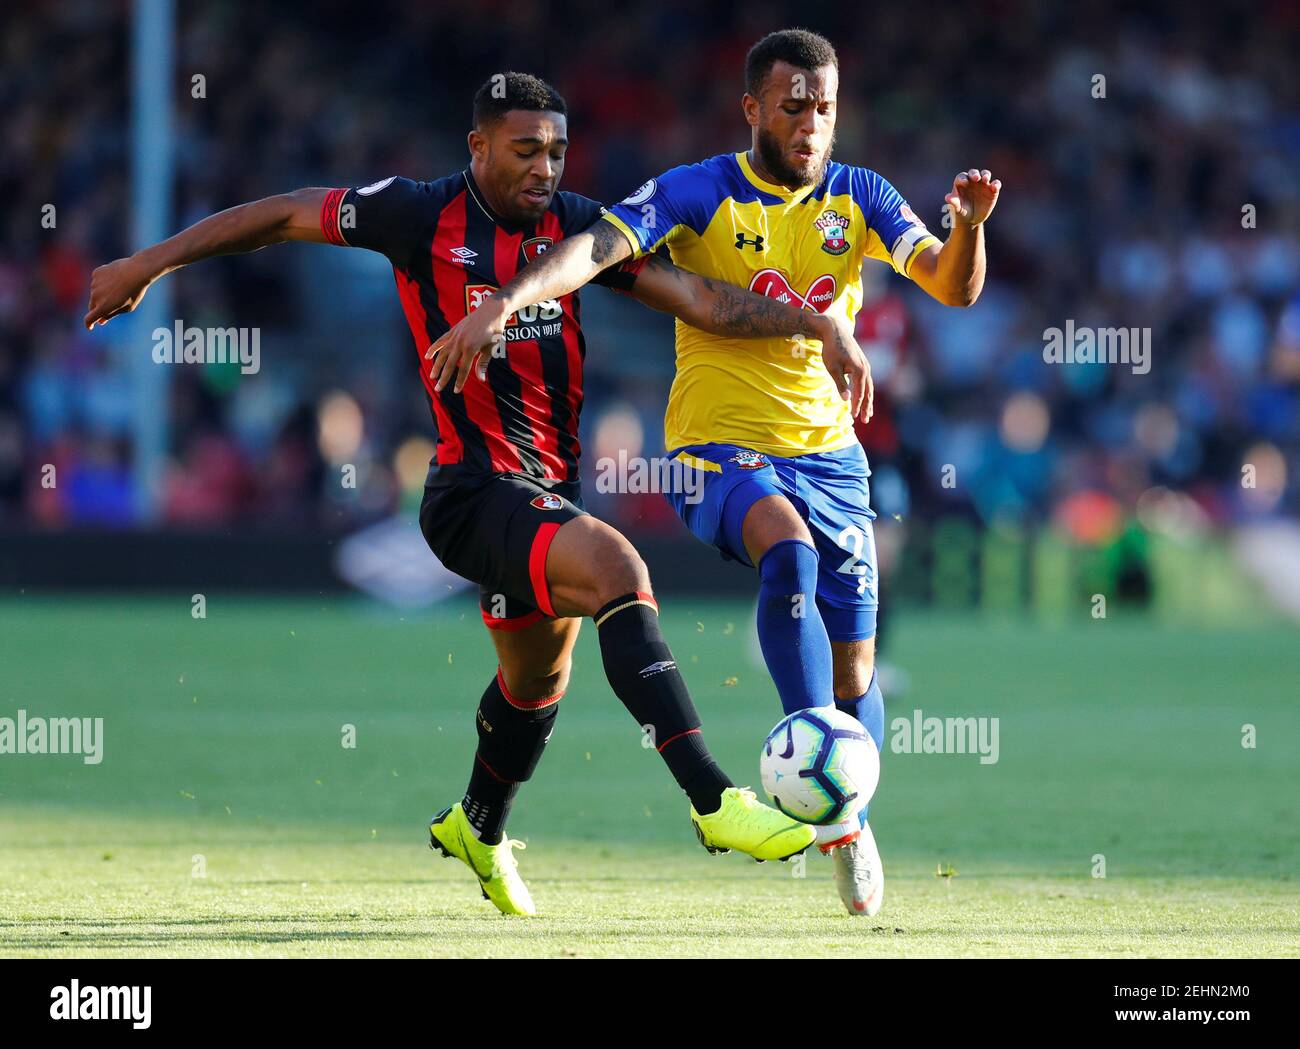 Soccer Football - Premier League - AFC Bournemouth v Southampton - Vitality Stadium, Bournemouth, Britain - October 20, 2018  Bournemouth's Jordon Ibe in action with Southampton's Nathan Redmond   REUTERS/Eddie Keogh  EDITORIAL USE ONLY. No use with unauthorized audio, video, data, fixture lists, club/league logos or 'live' services. Online in-match use limited to 75 images, no video emulation. No use in betting, games or single club/league/player publications.  Please contact your account representative for further details. Stock Photo